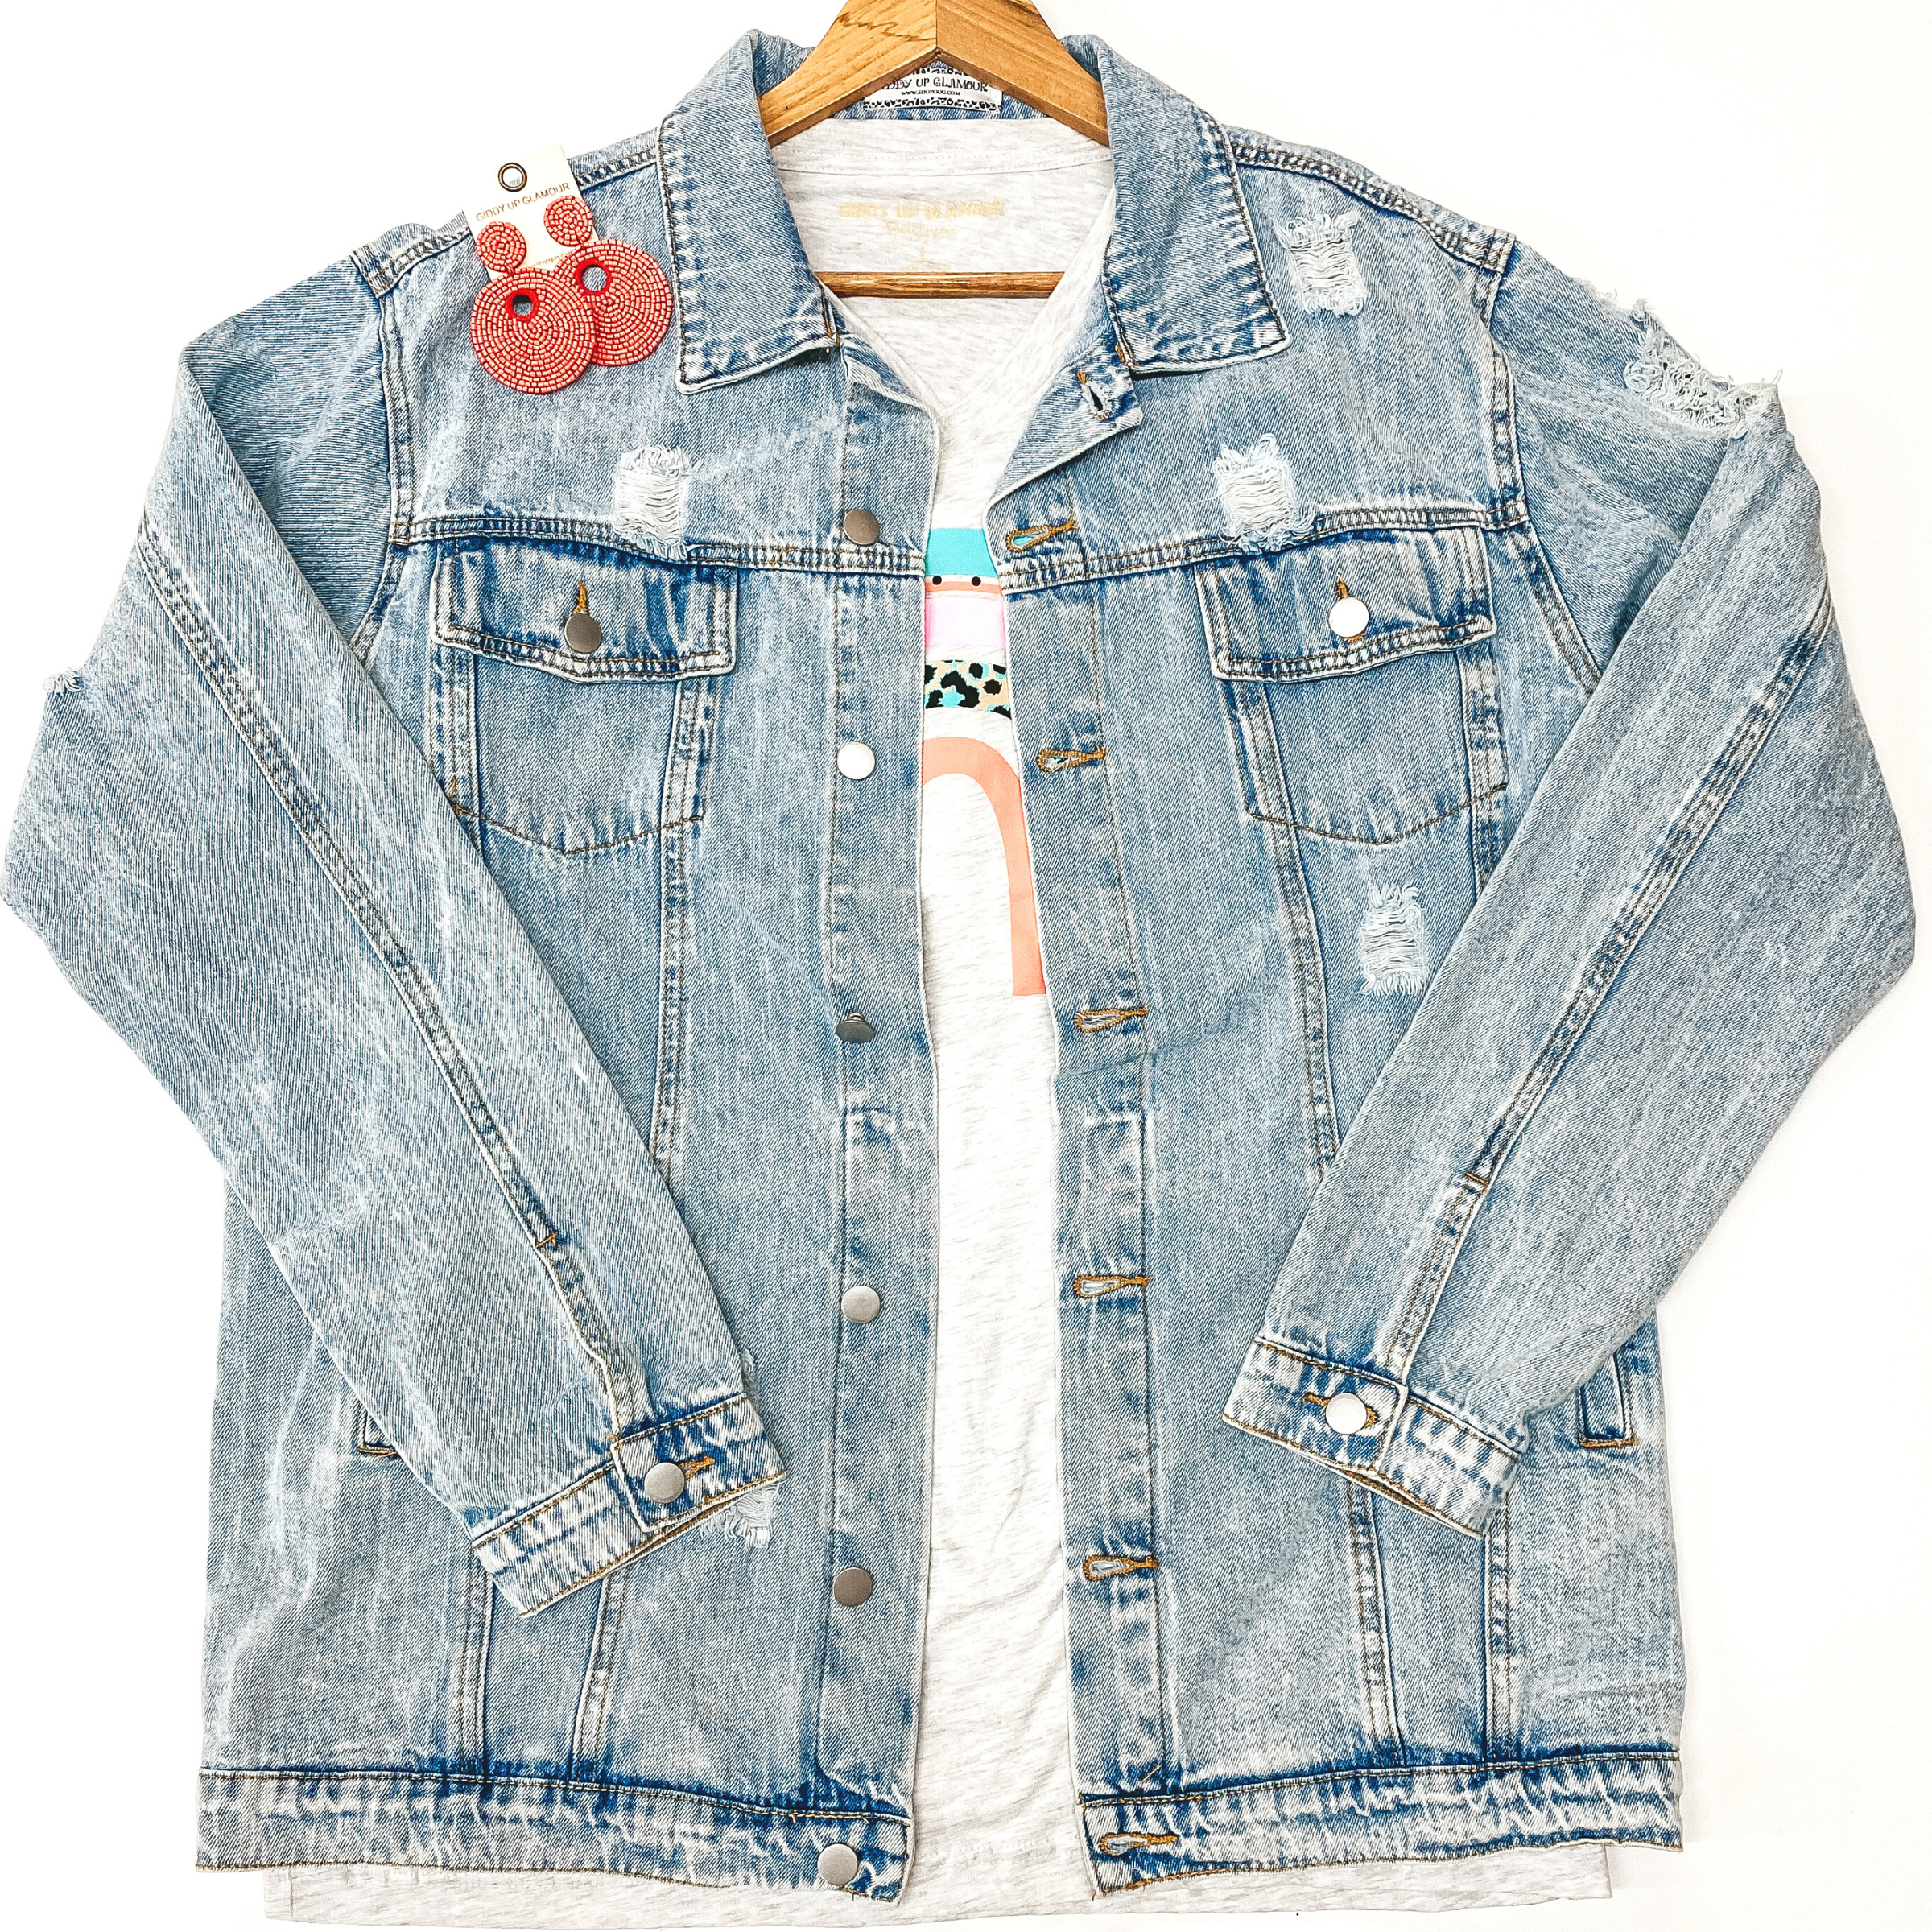 Plus Sizes | On The Road Distressed Button Up Denim Jacket in Light Wash - Giddy Up Glamour Boutique